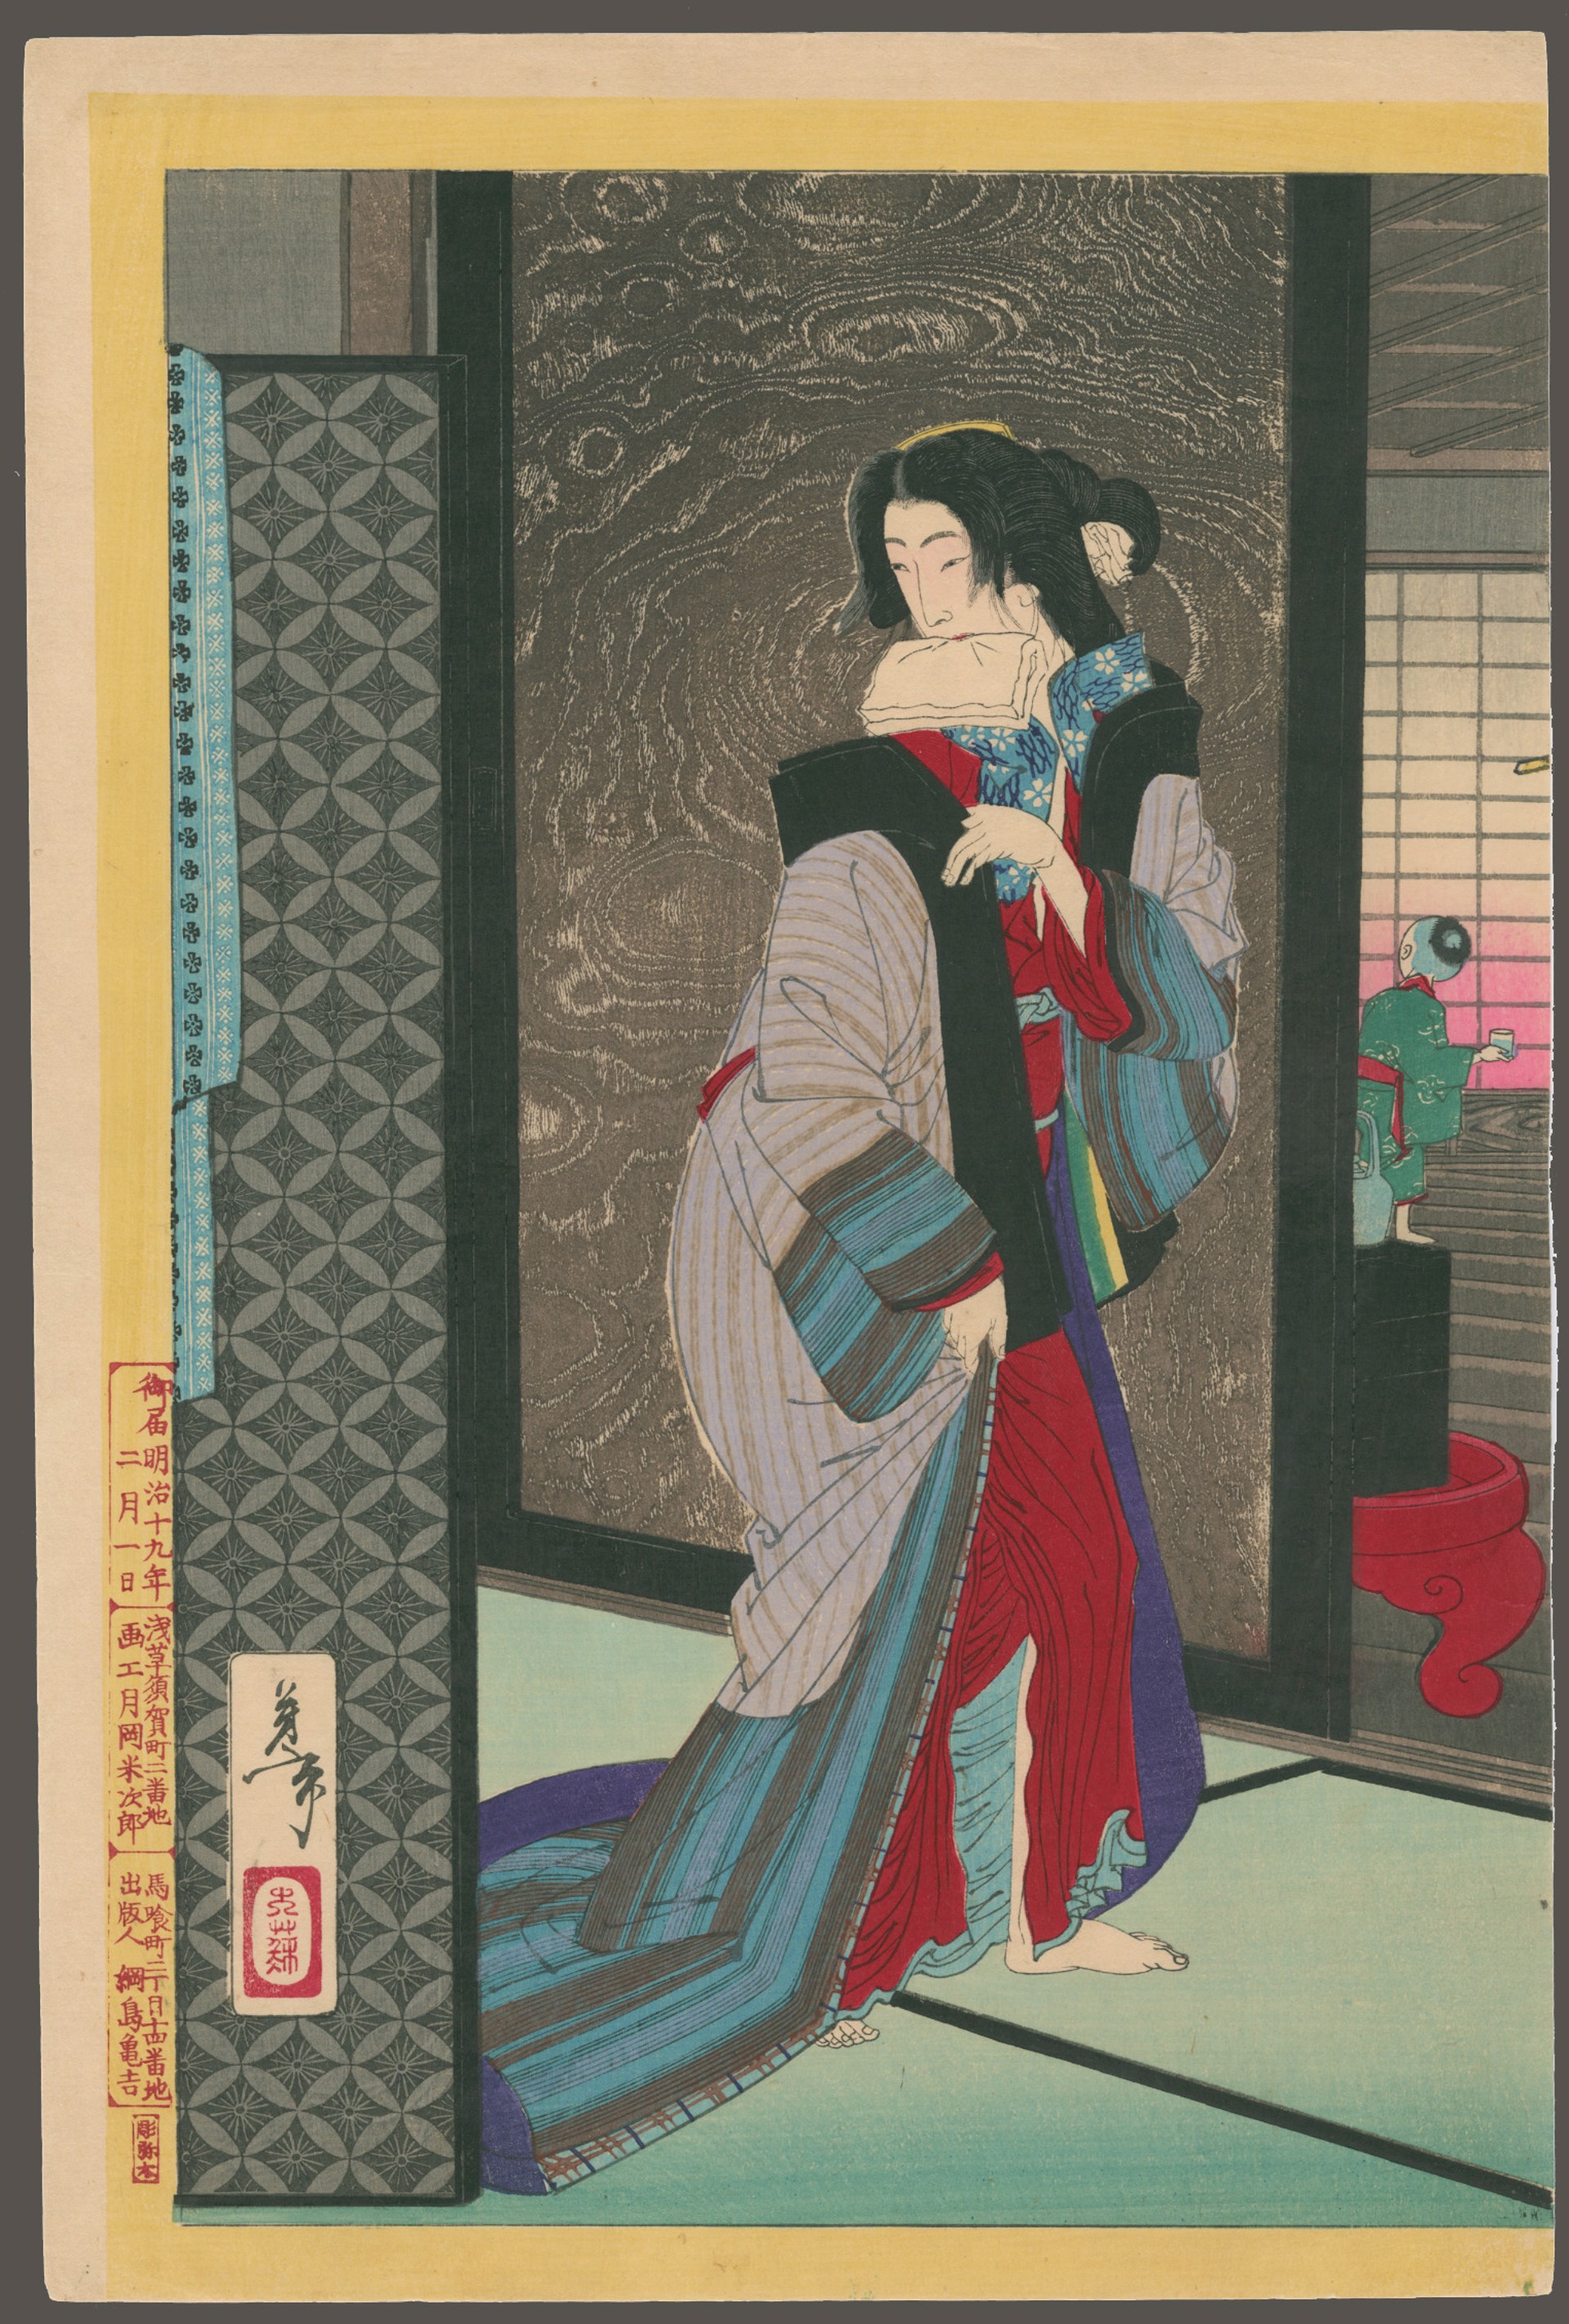 The Story of the Courtesan Shiraito of the Hashimoto-ya Newly Selected Eastern Brocade Pictures by Yoshitoshi